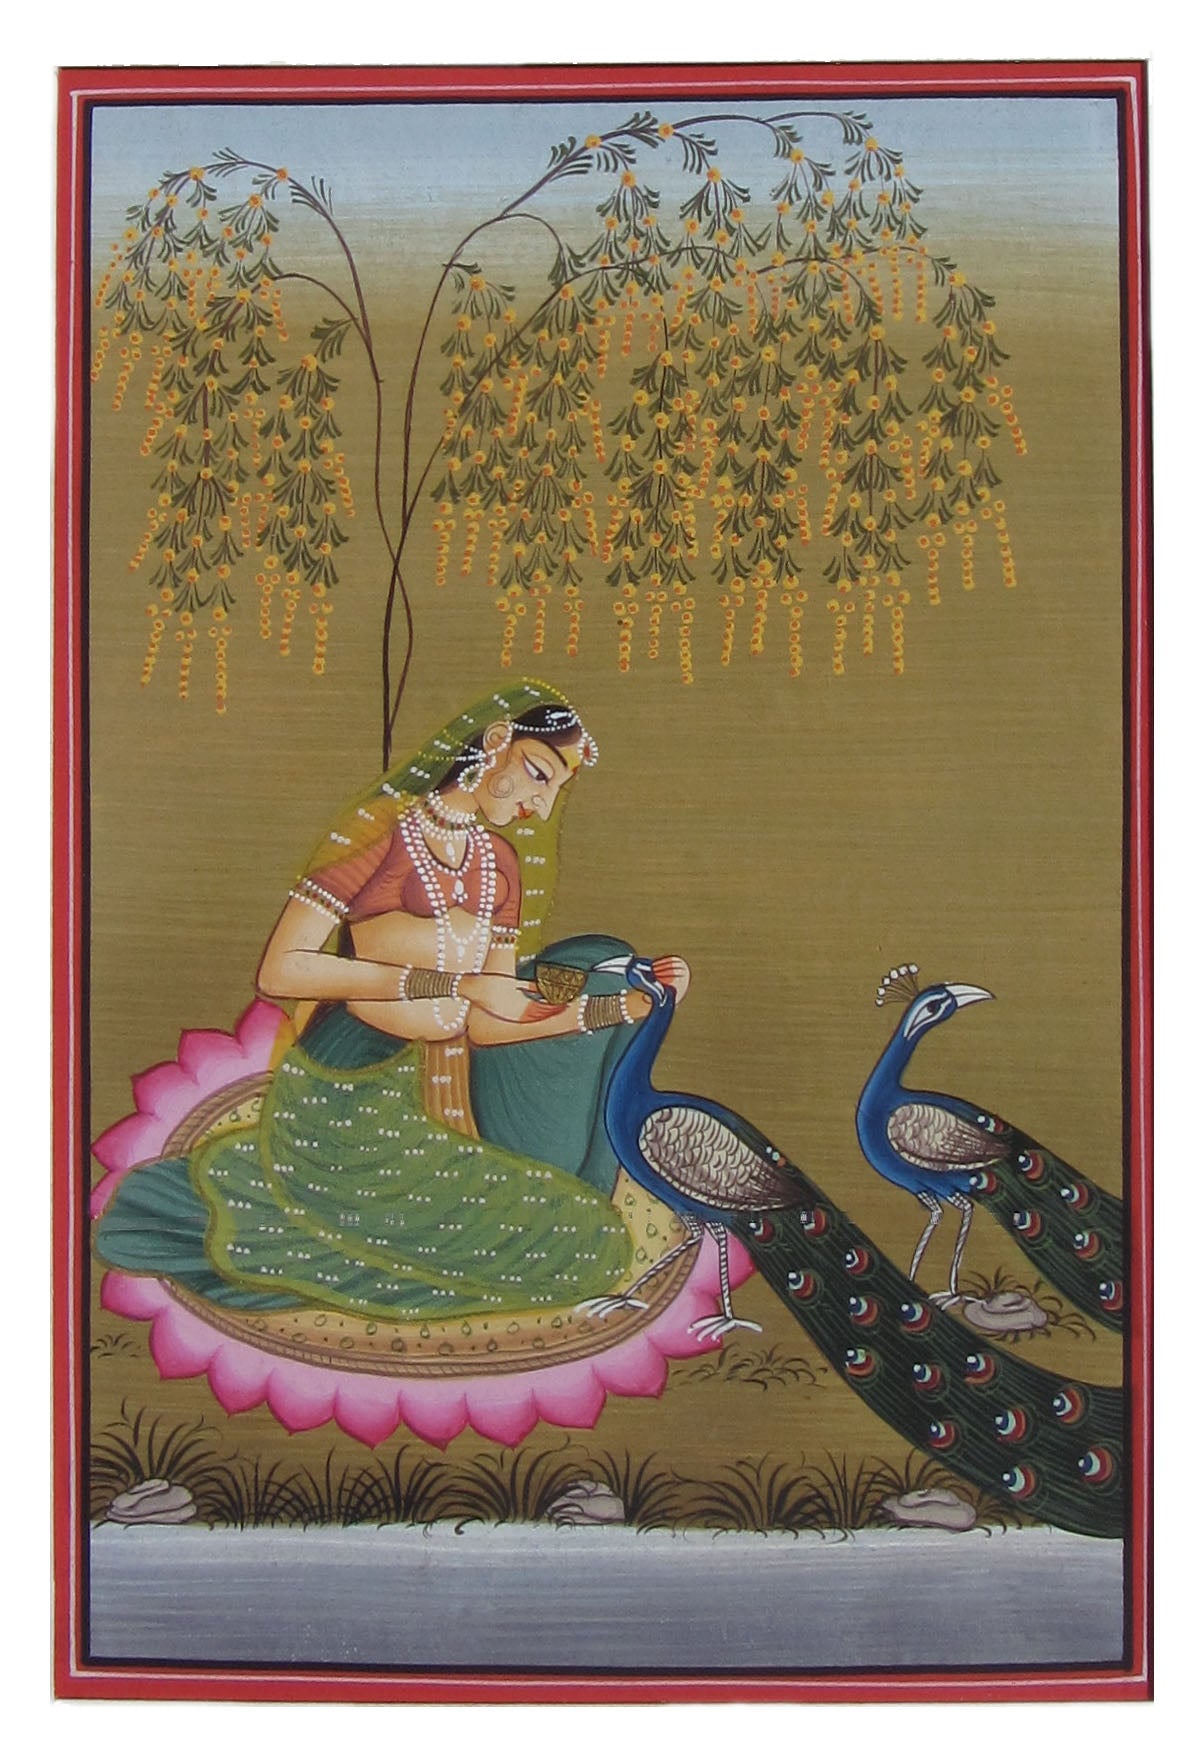 Mughal Queen with Peacocks Original Art Paper Painting